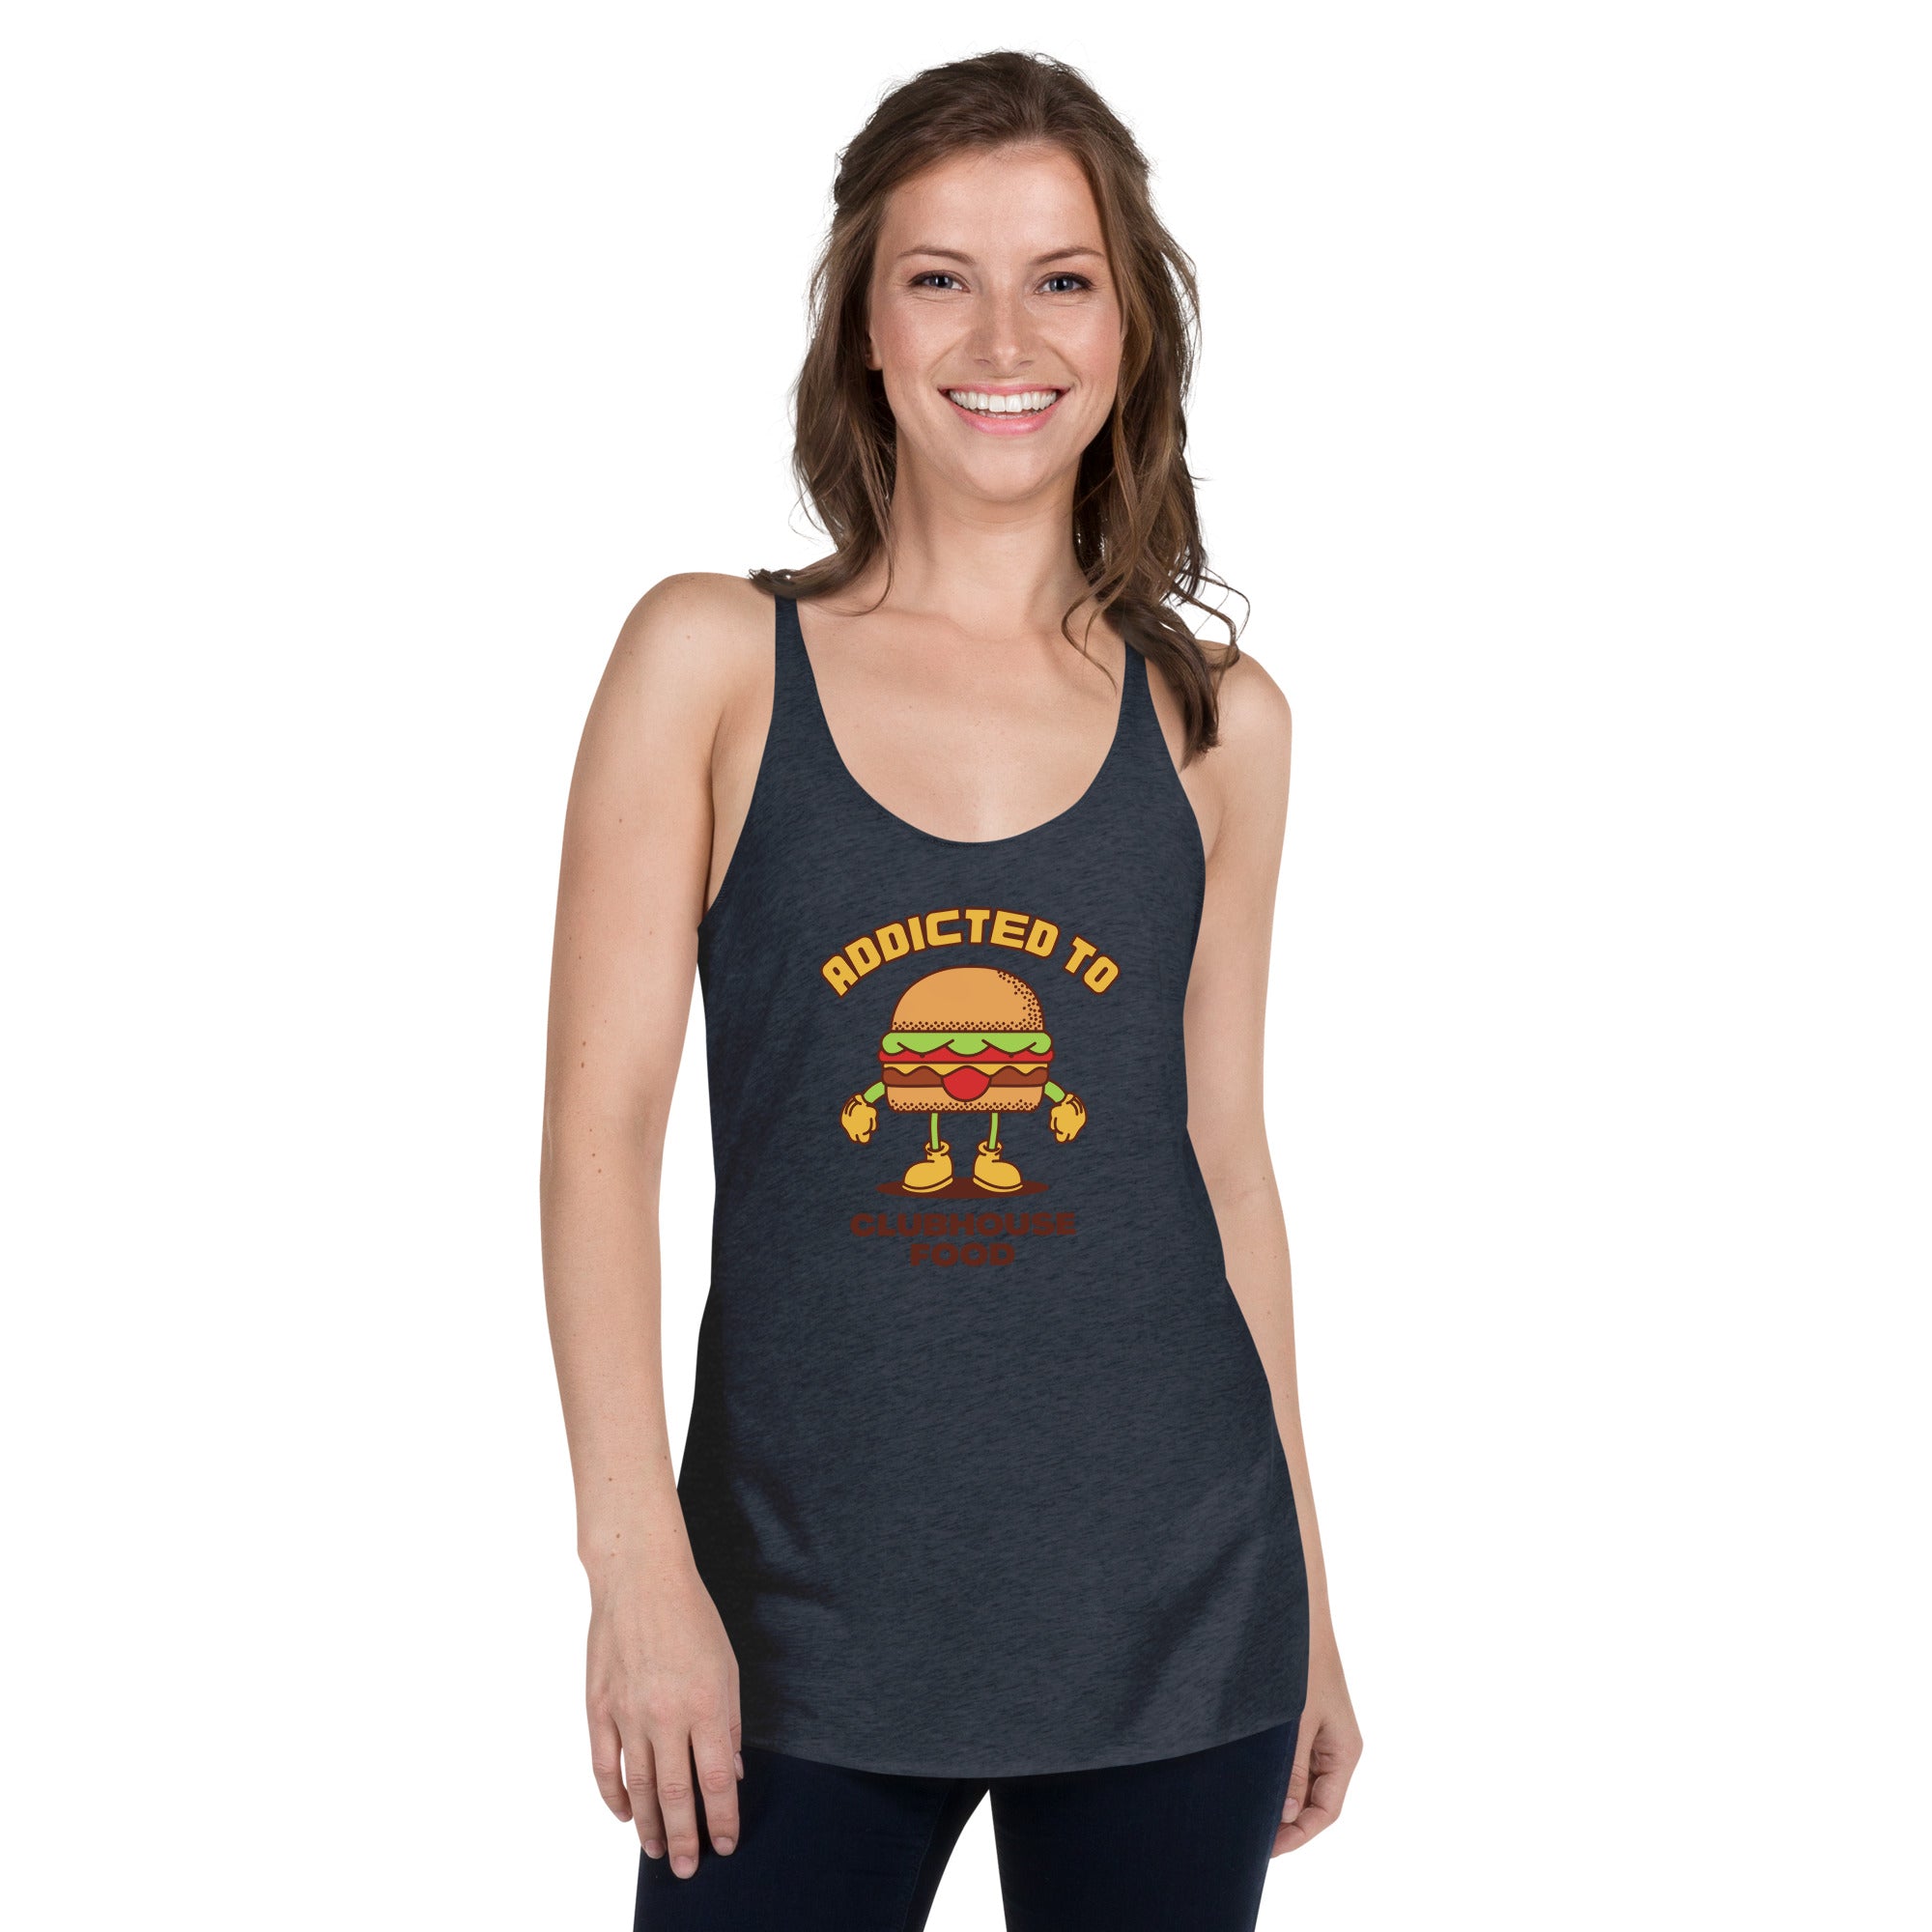 Addicted To Clubhouse Food Women's Racerback Tank